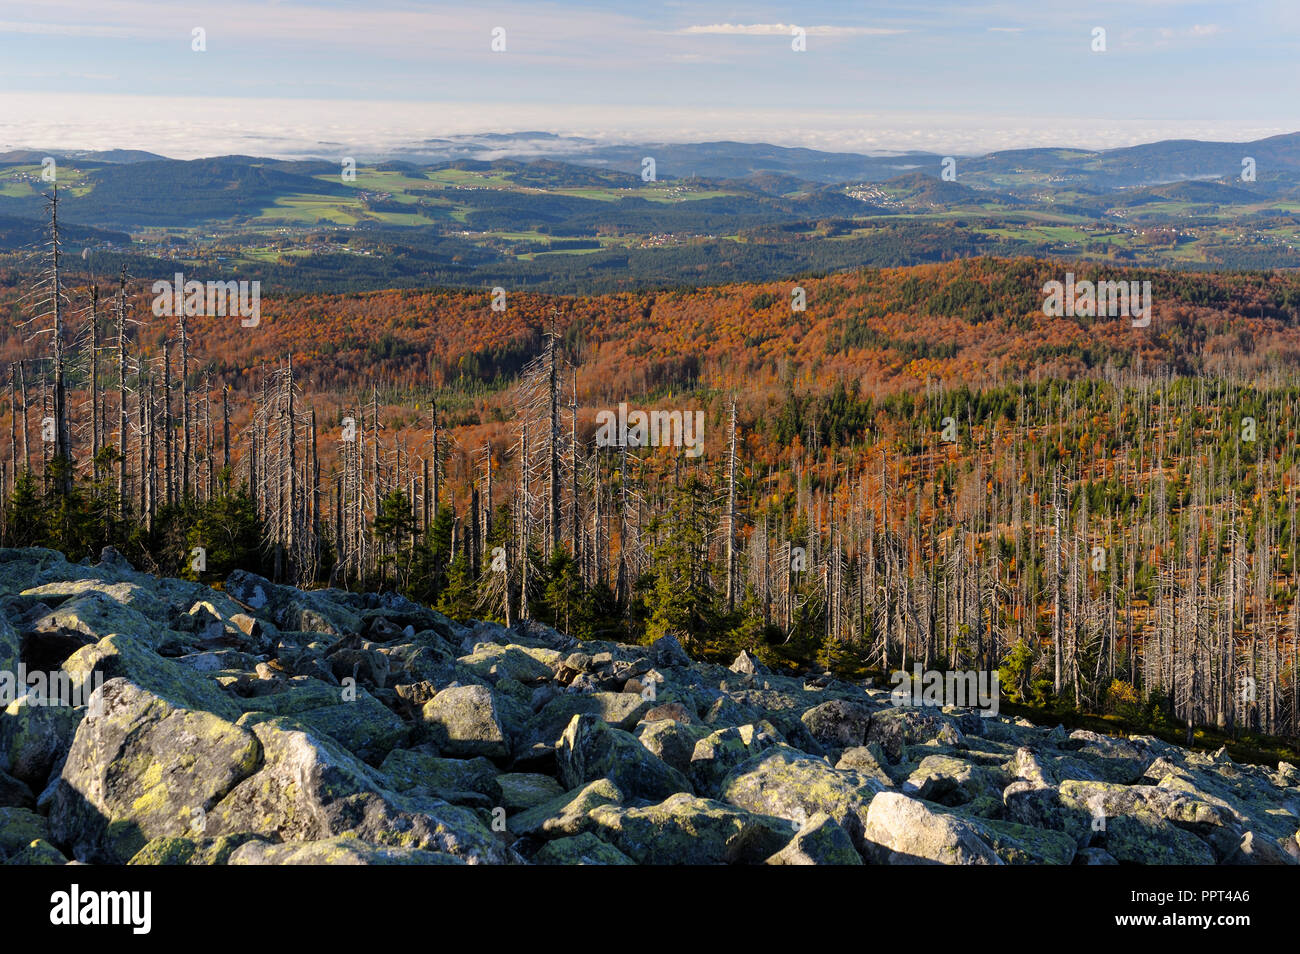 Summit of the Lusen, october, Lusen, Bavarian Forest National Park, Germany Stock Photo